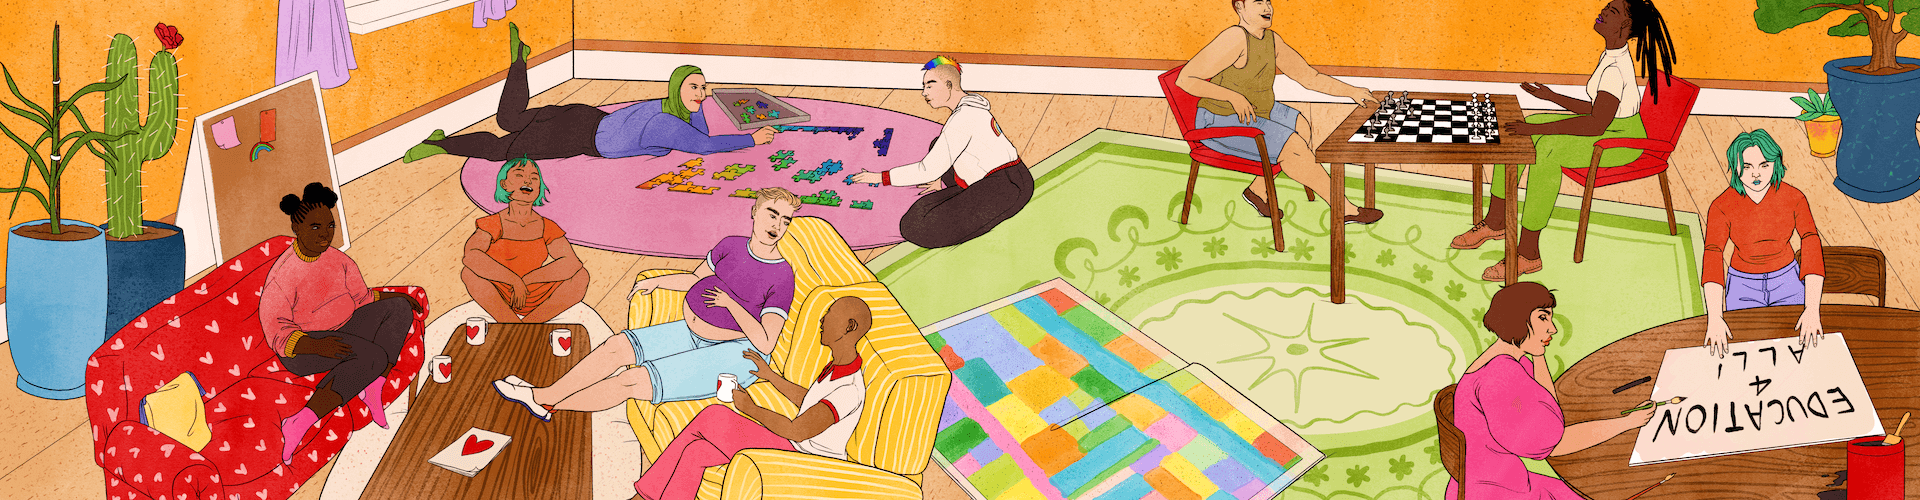 An illustration of a group of LGBTQ+ young people in a shared space in a community centre. Some of them are sitting on a sofa together, others are playing board games together, and some are creating materials for campaigning.  